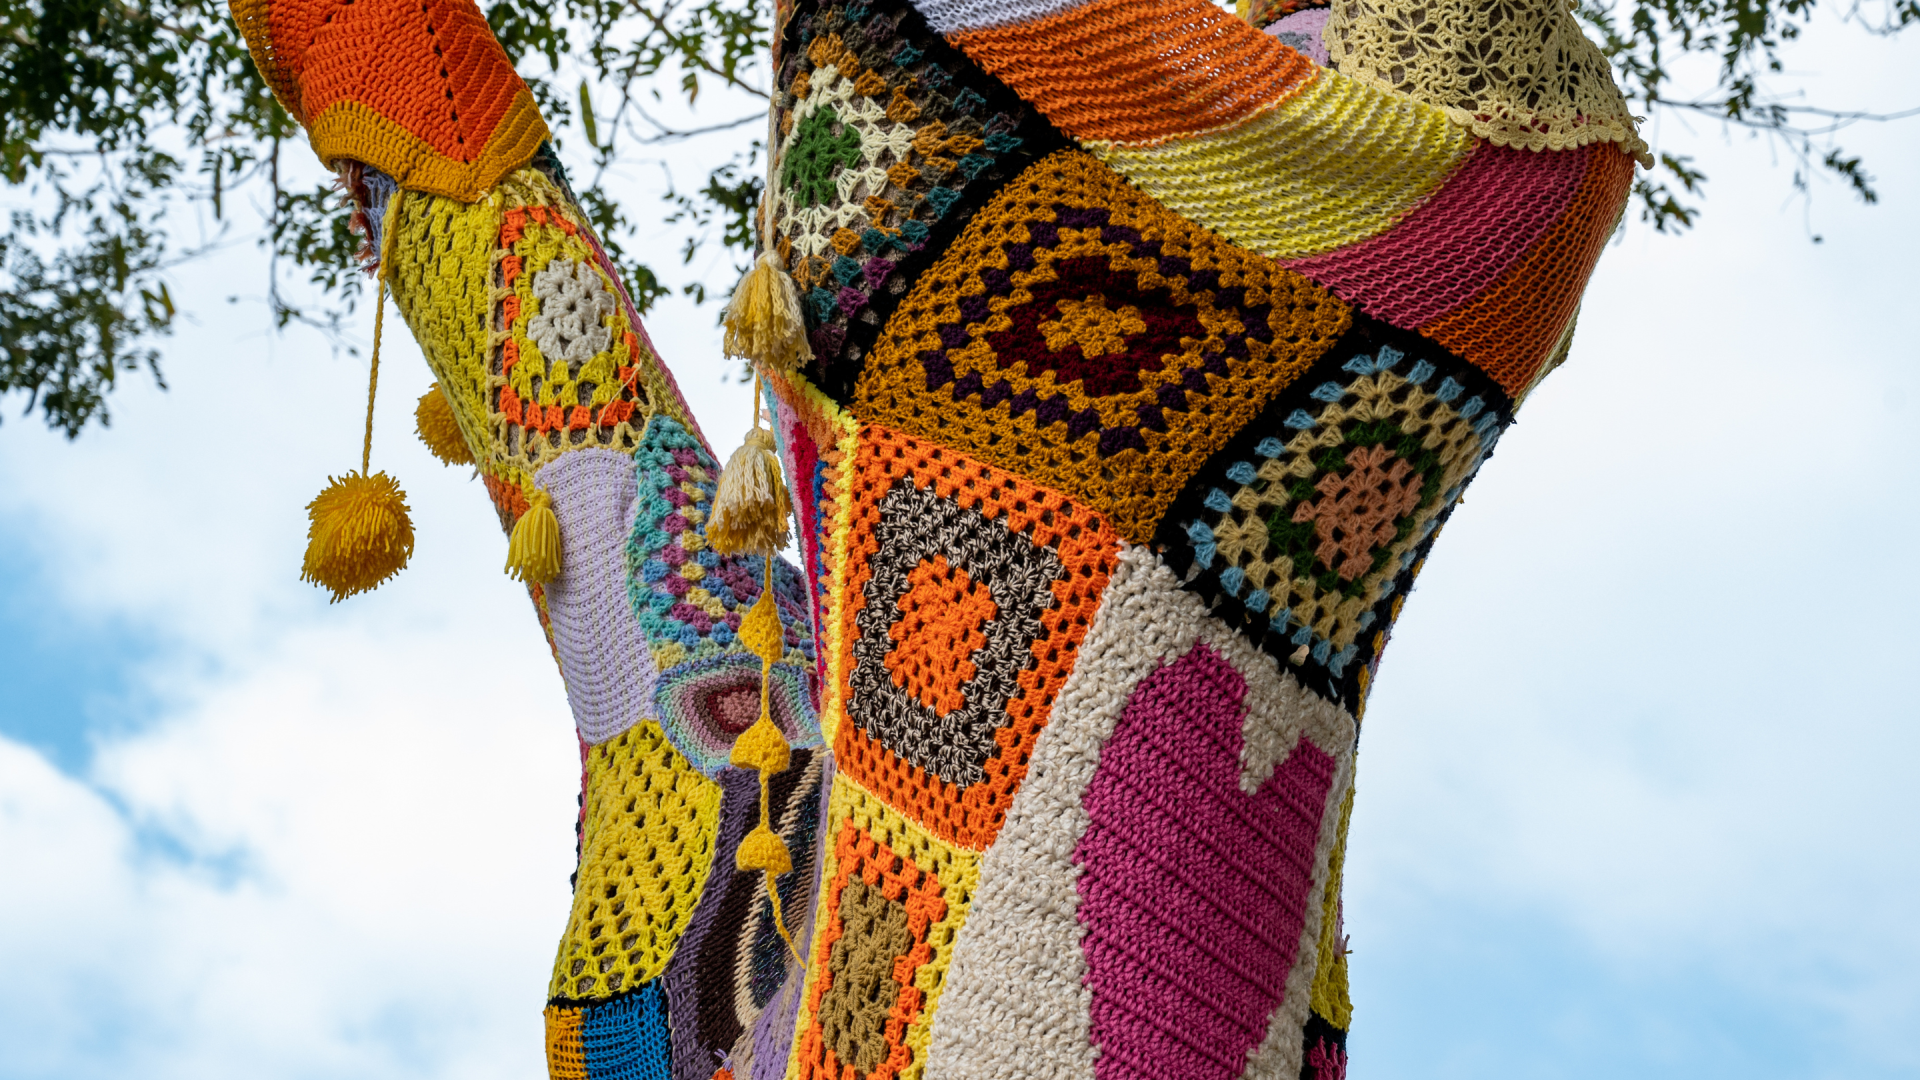 Yarn Bombing Sessions with Debbie